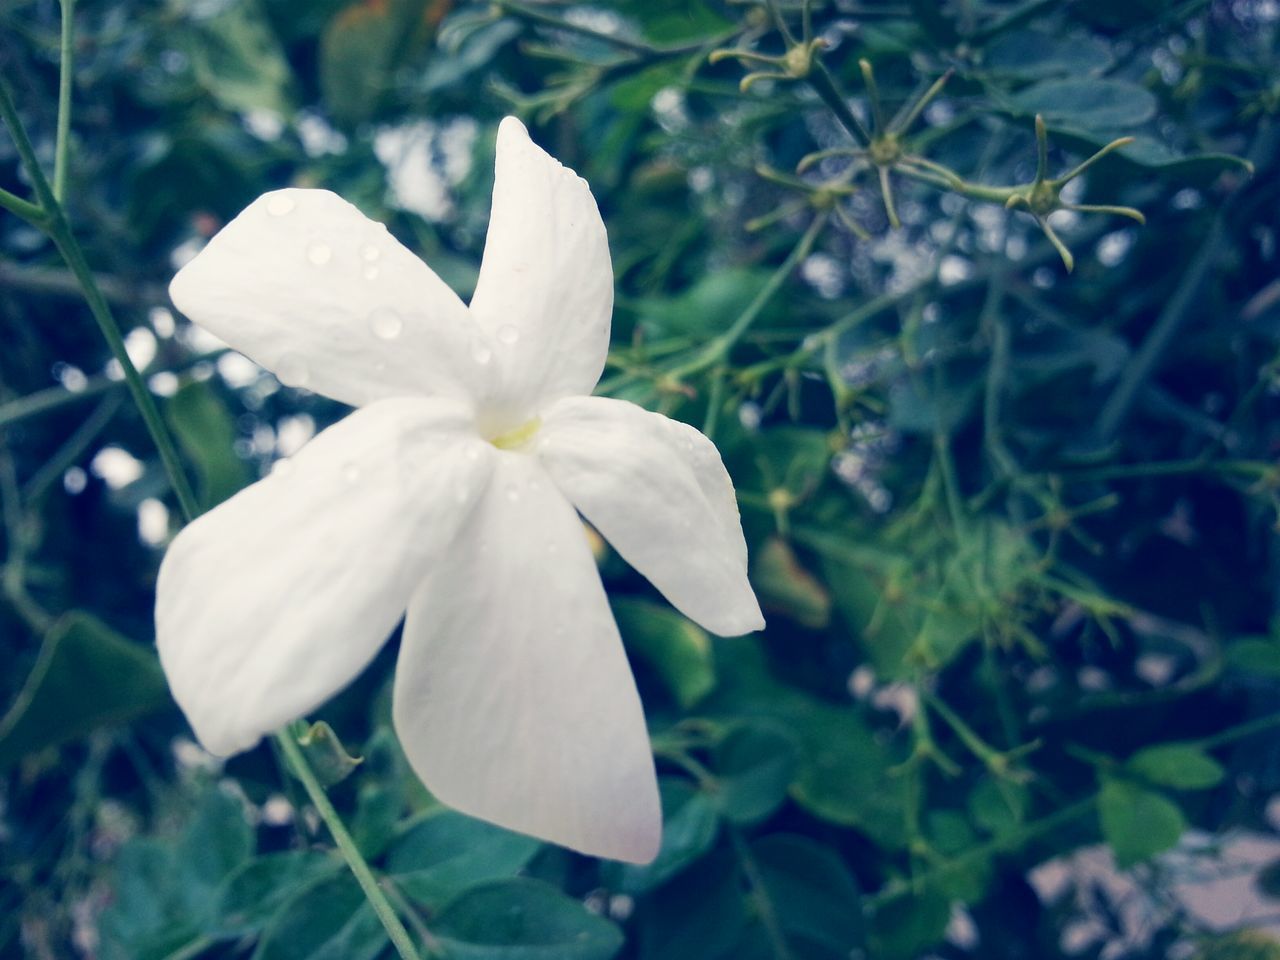 flower, petal, freshness, growth, fragility, flower head, beauty in nature, white color, close-up, blooming, focus on foreground, nature, plant, leaf, in bloom, stamen, pollen, single flower, day, park - man made space